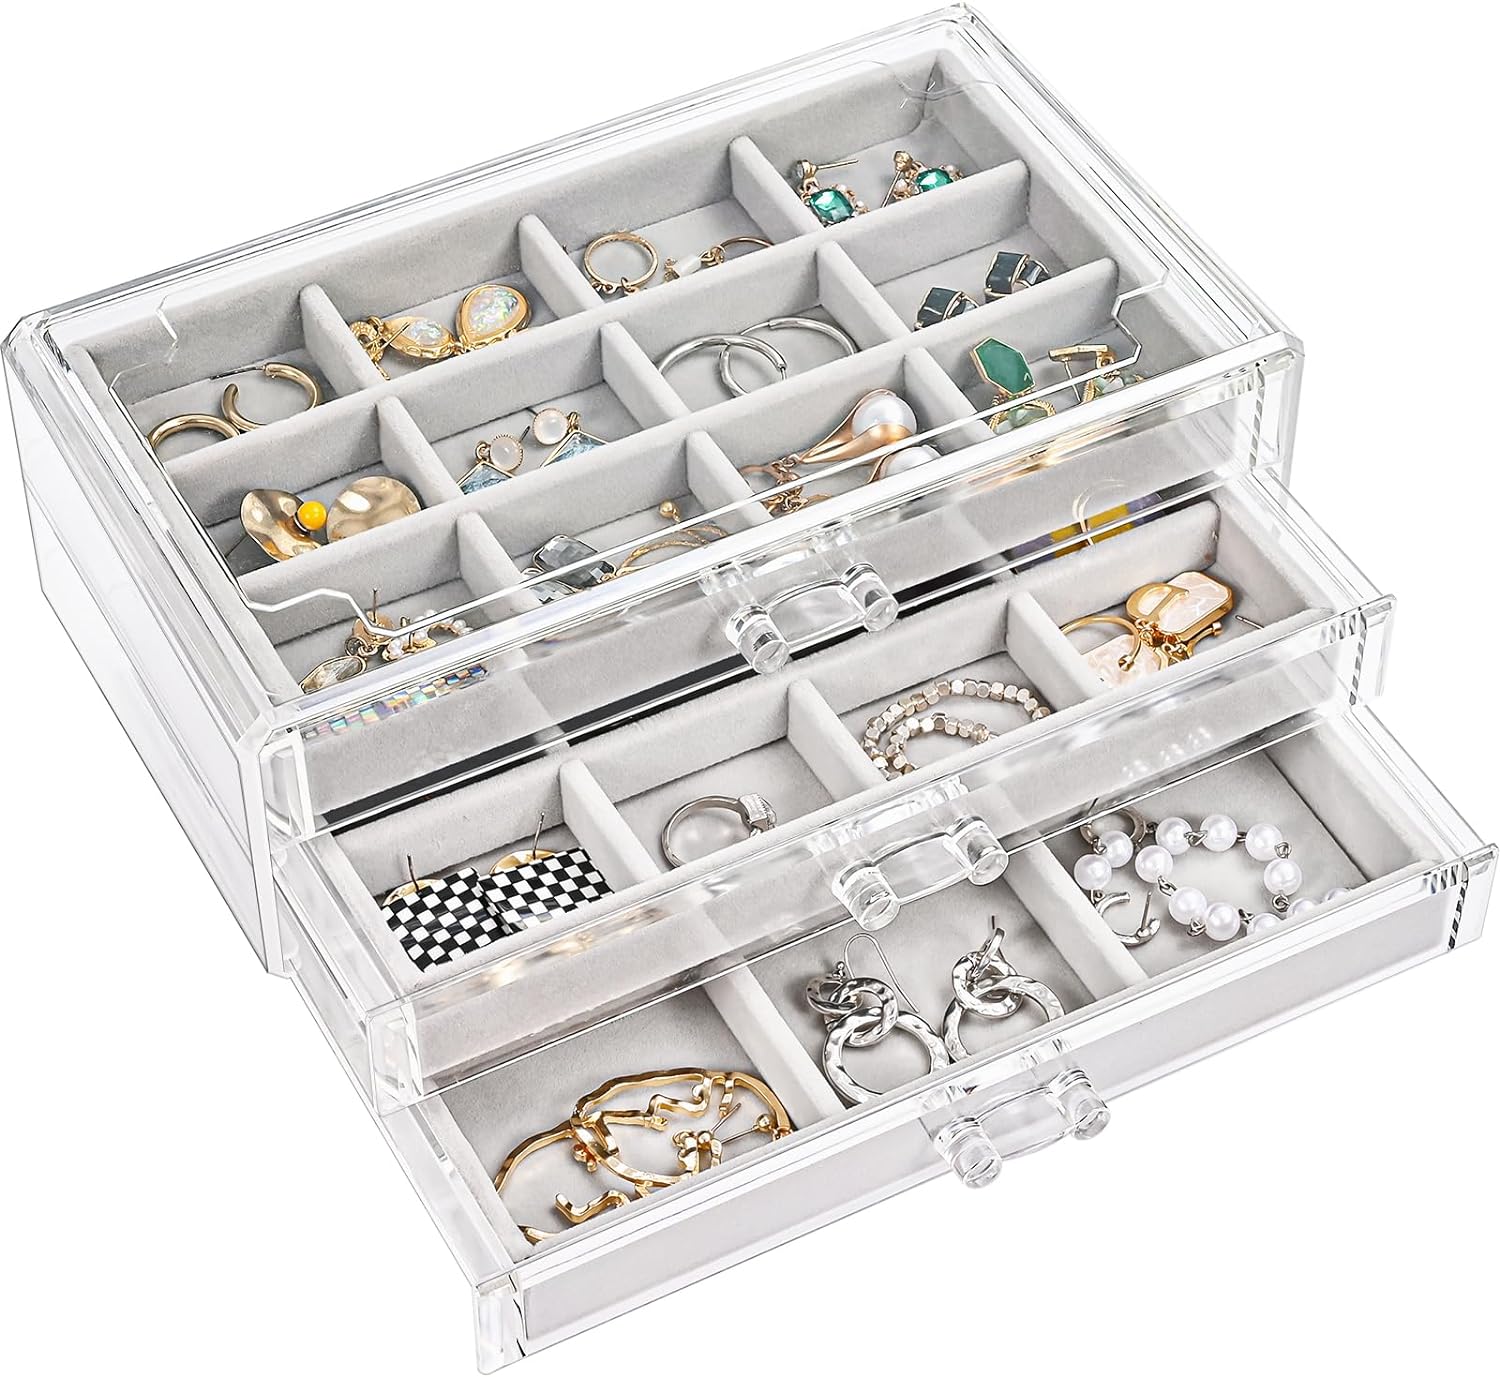 Earring Holder Organizer Box with 3 Drawers, Clear Acrylic Jewelry Box, Stackable Large Jewelry Storage Case with Adjustable Velvet Trays on Dresser Vanity (Gray)